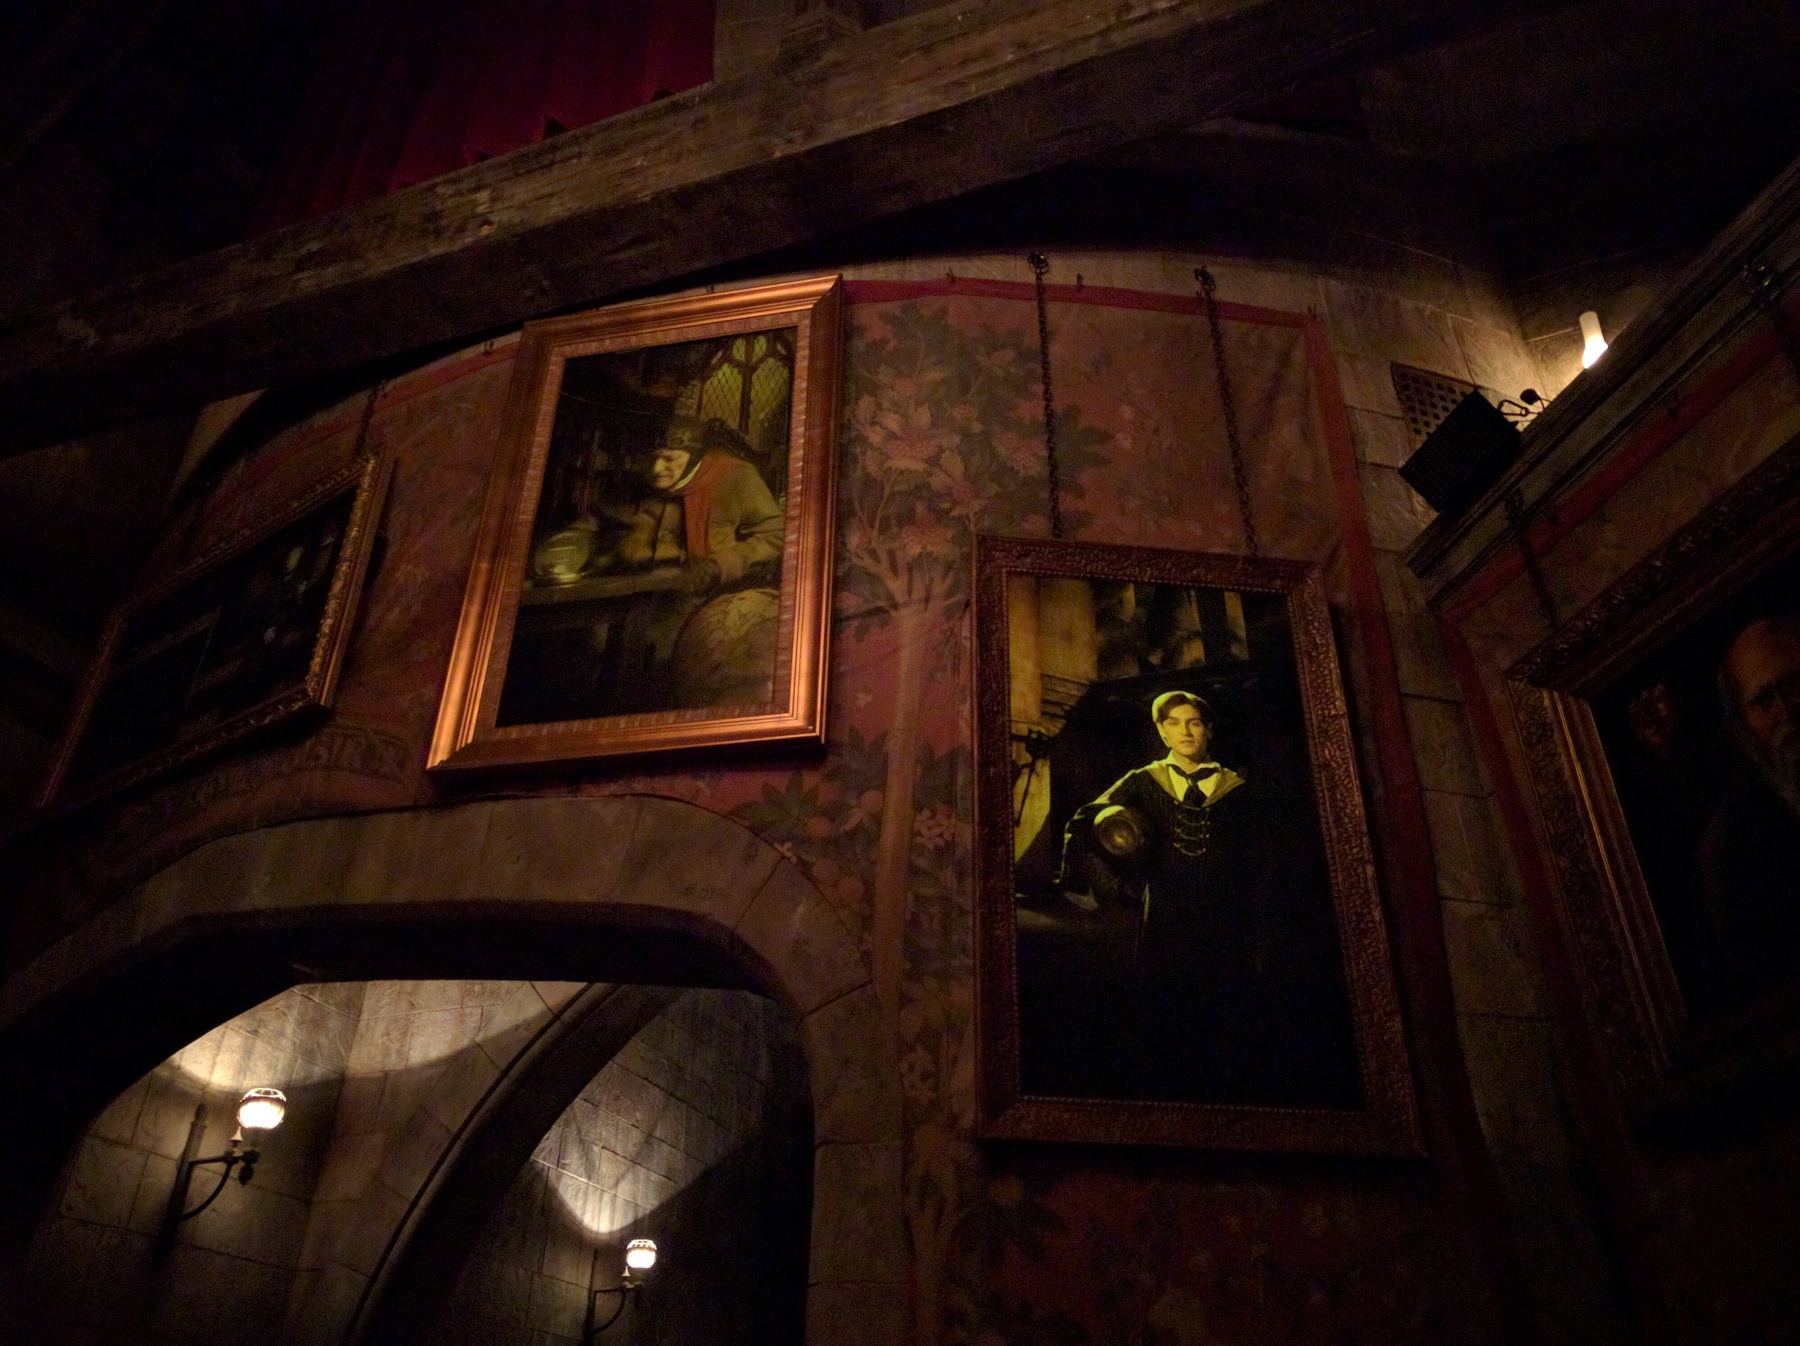 I loved the moving paintings that exist all throughout the queue.